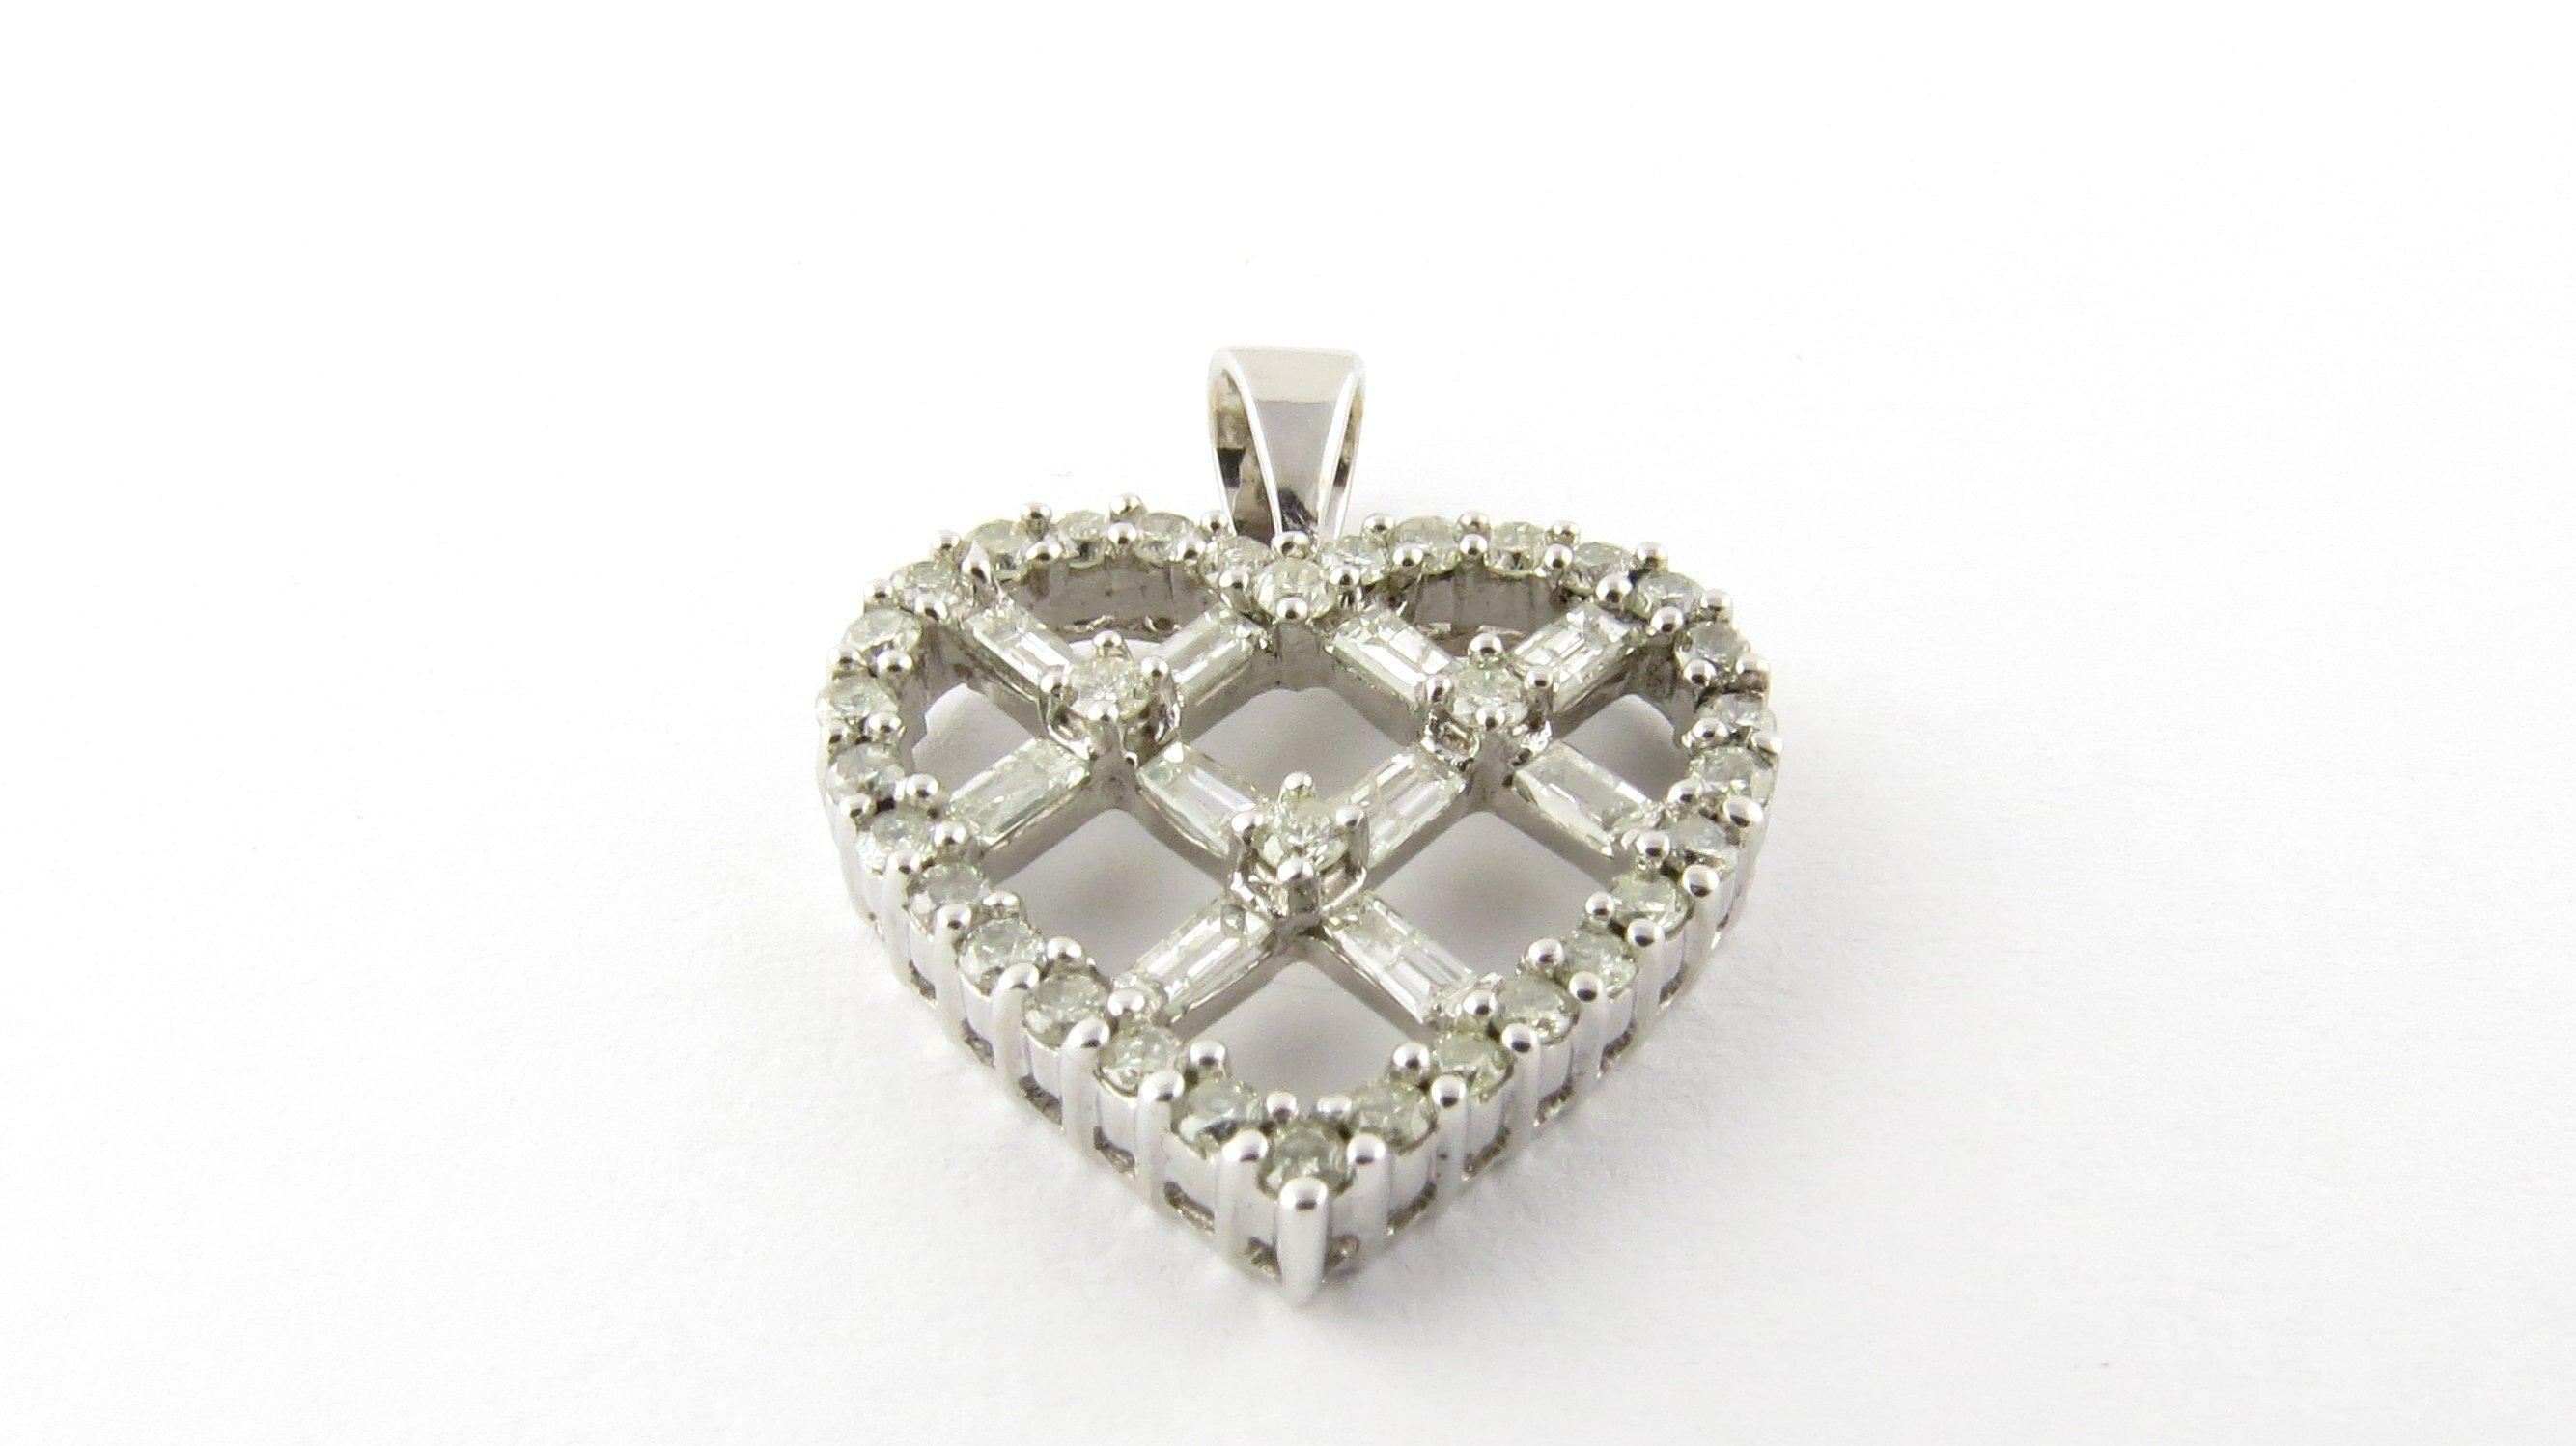 Vintage 14K white gold and diamond criss cross heart pendant. 

Criss cross my heart with diamonds!! 

29 round brilliant diamonds at approx. .29ct each. 10 baguette diamonds at approx. .12ct each. Approx diamond twt .50ct. I clarity. J-K color.